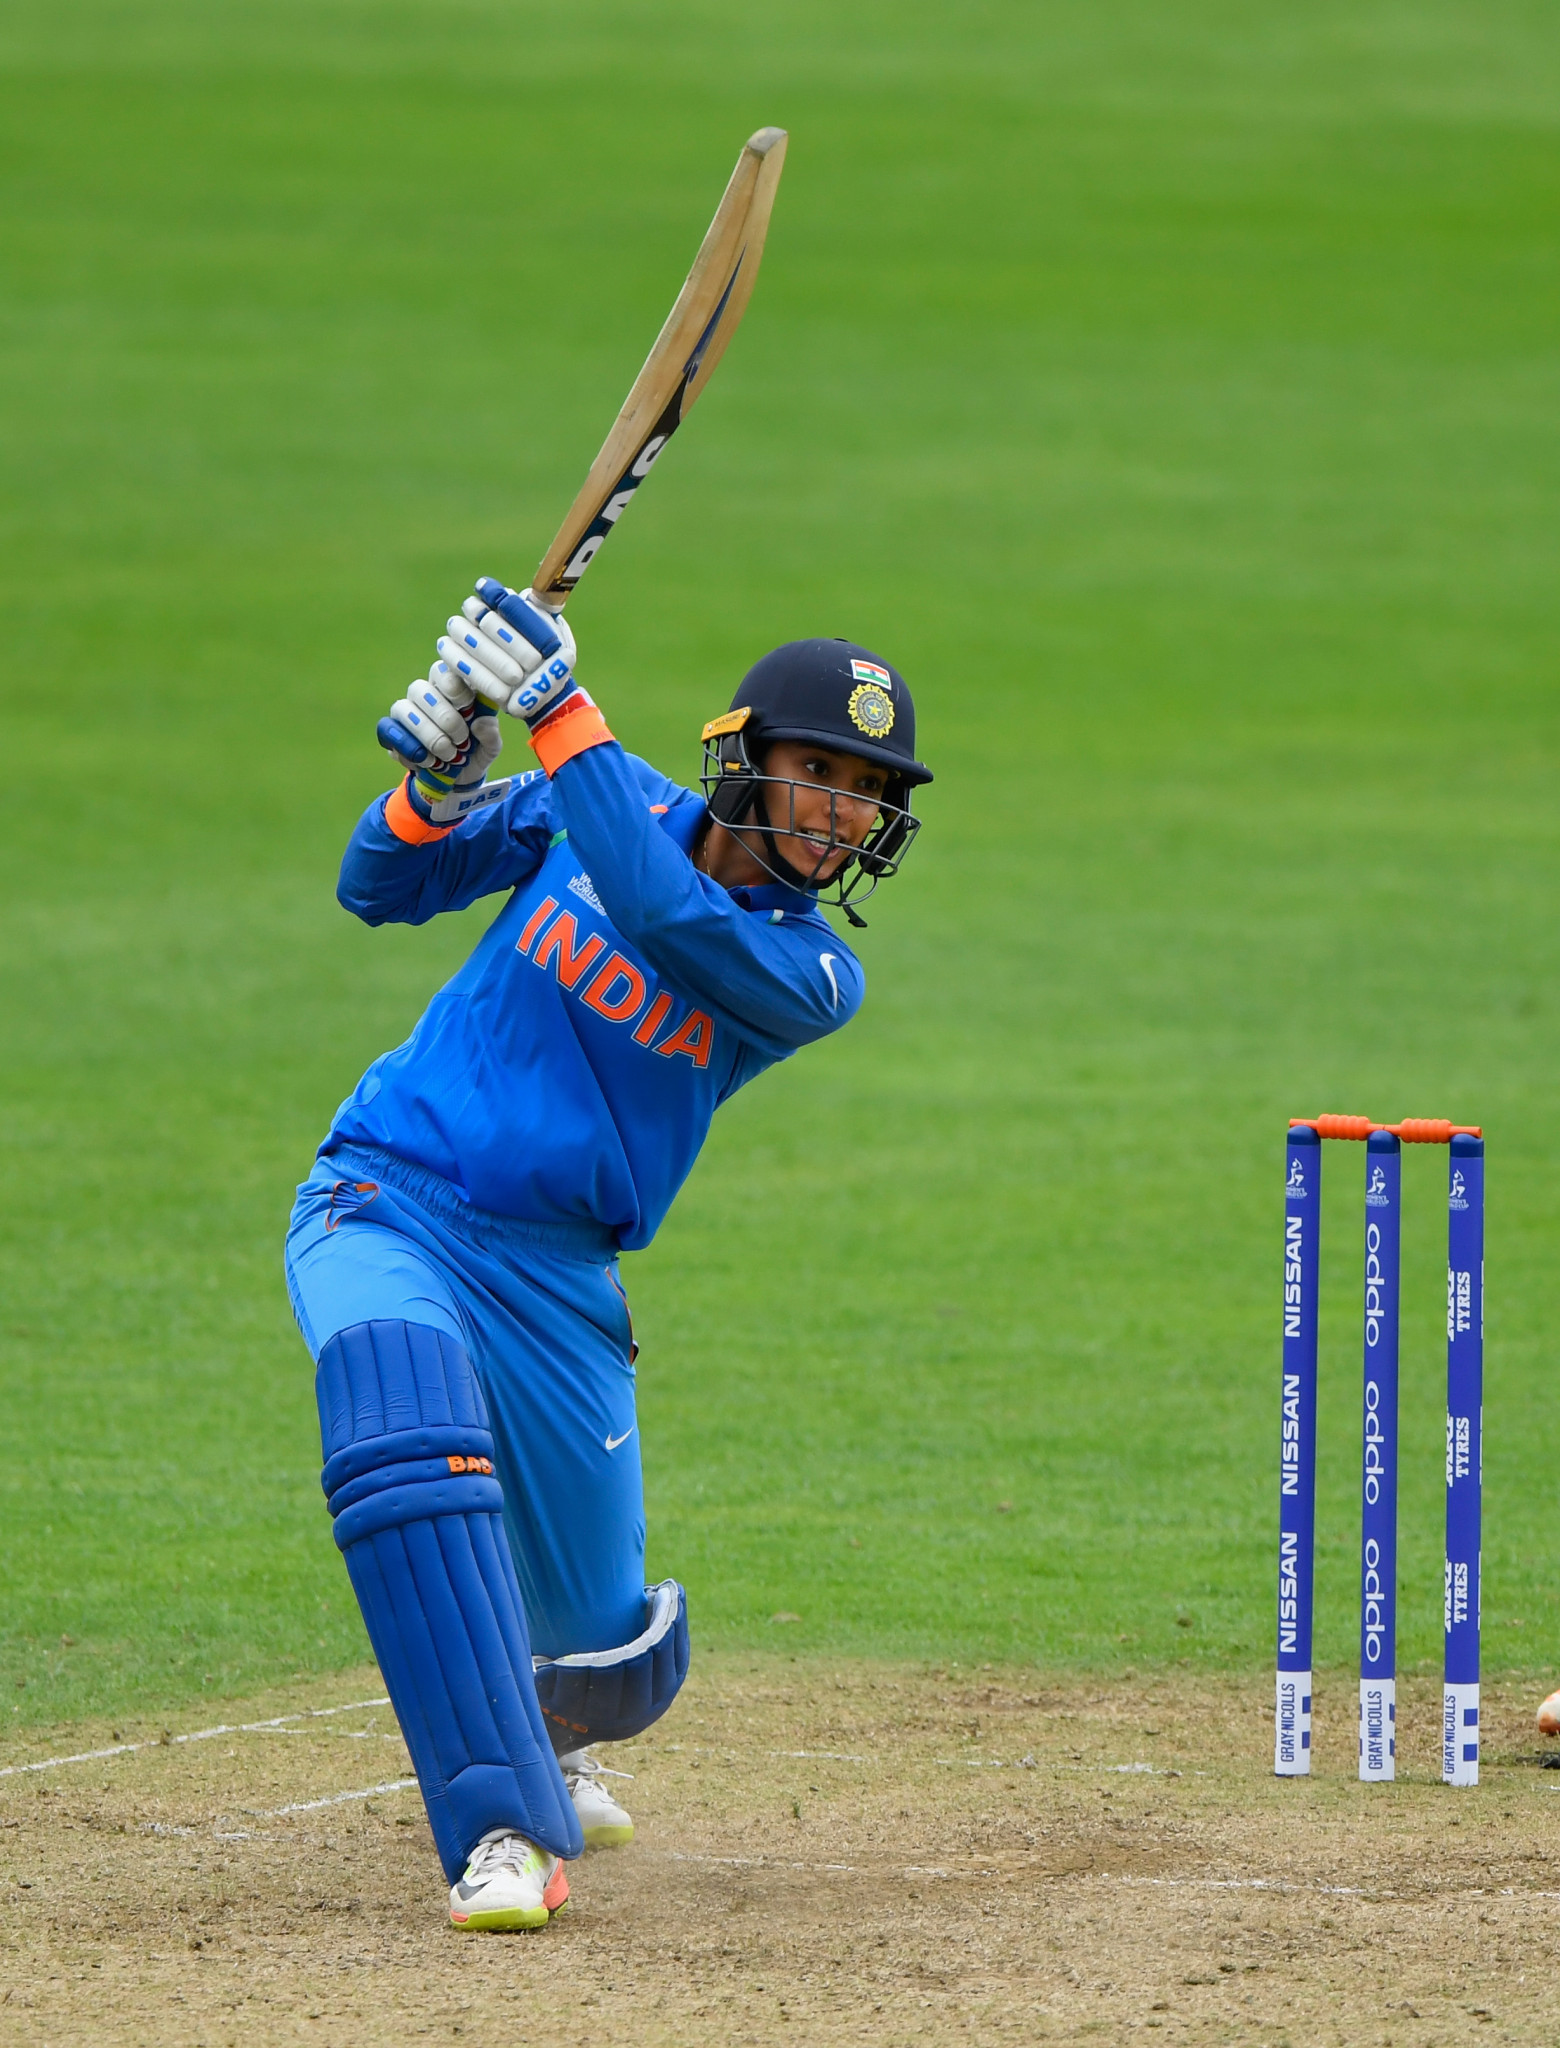 Smriti Mandhana has been in fine form with the bat ©Getty Images